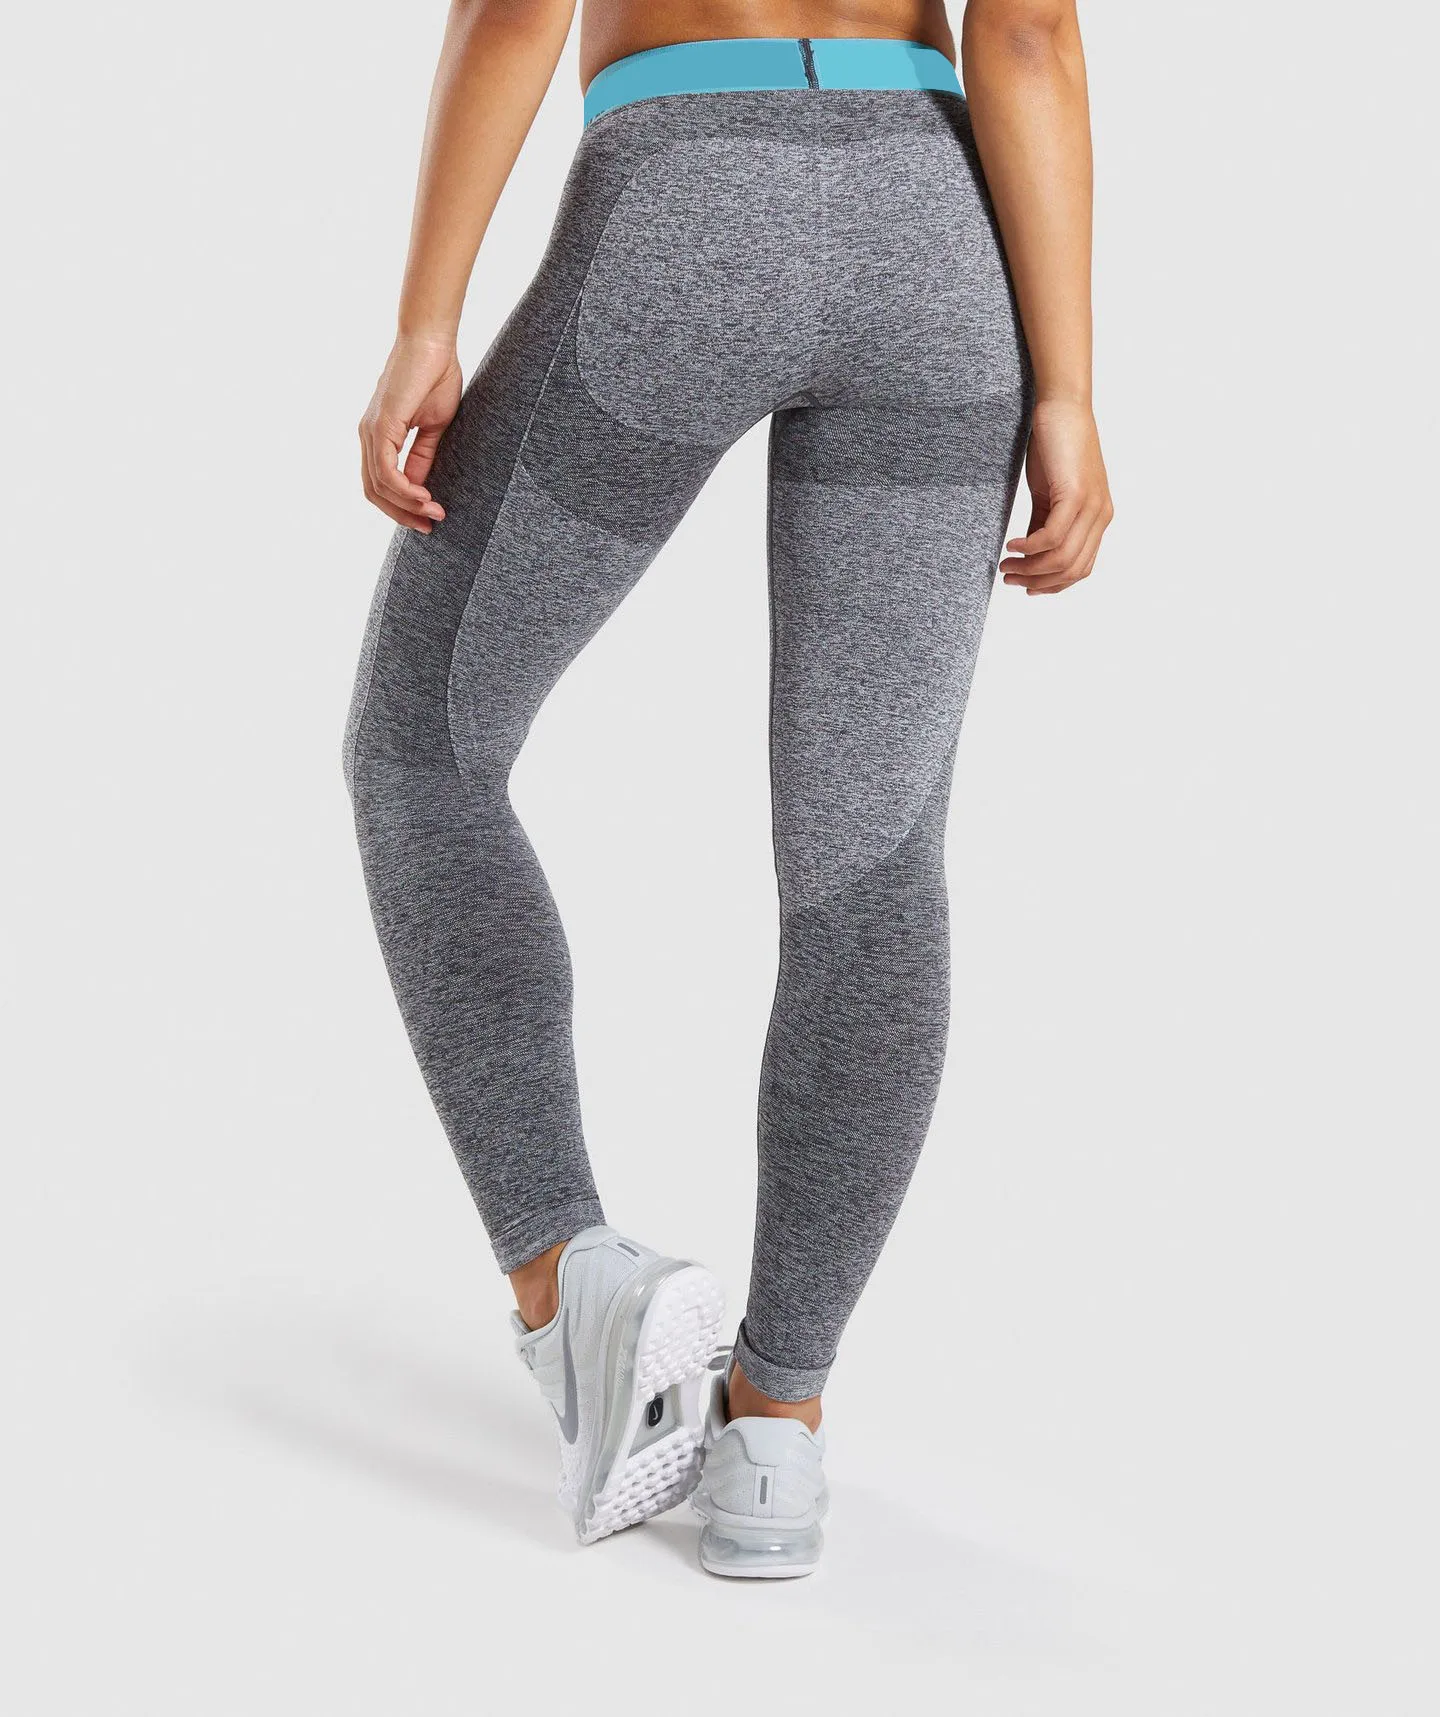 Women's High-elasticity Low-rise Yoga Fitness Quick-drying Stretch Hips and Stovepipe Pants  Legging Pants Woman